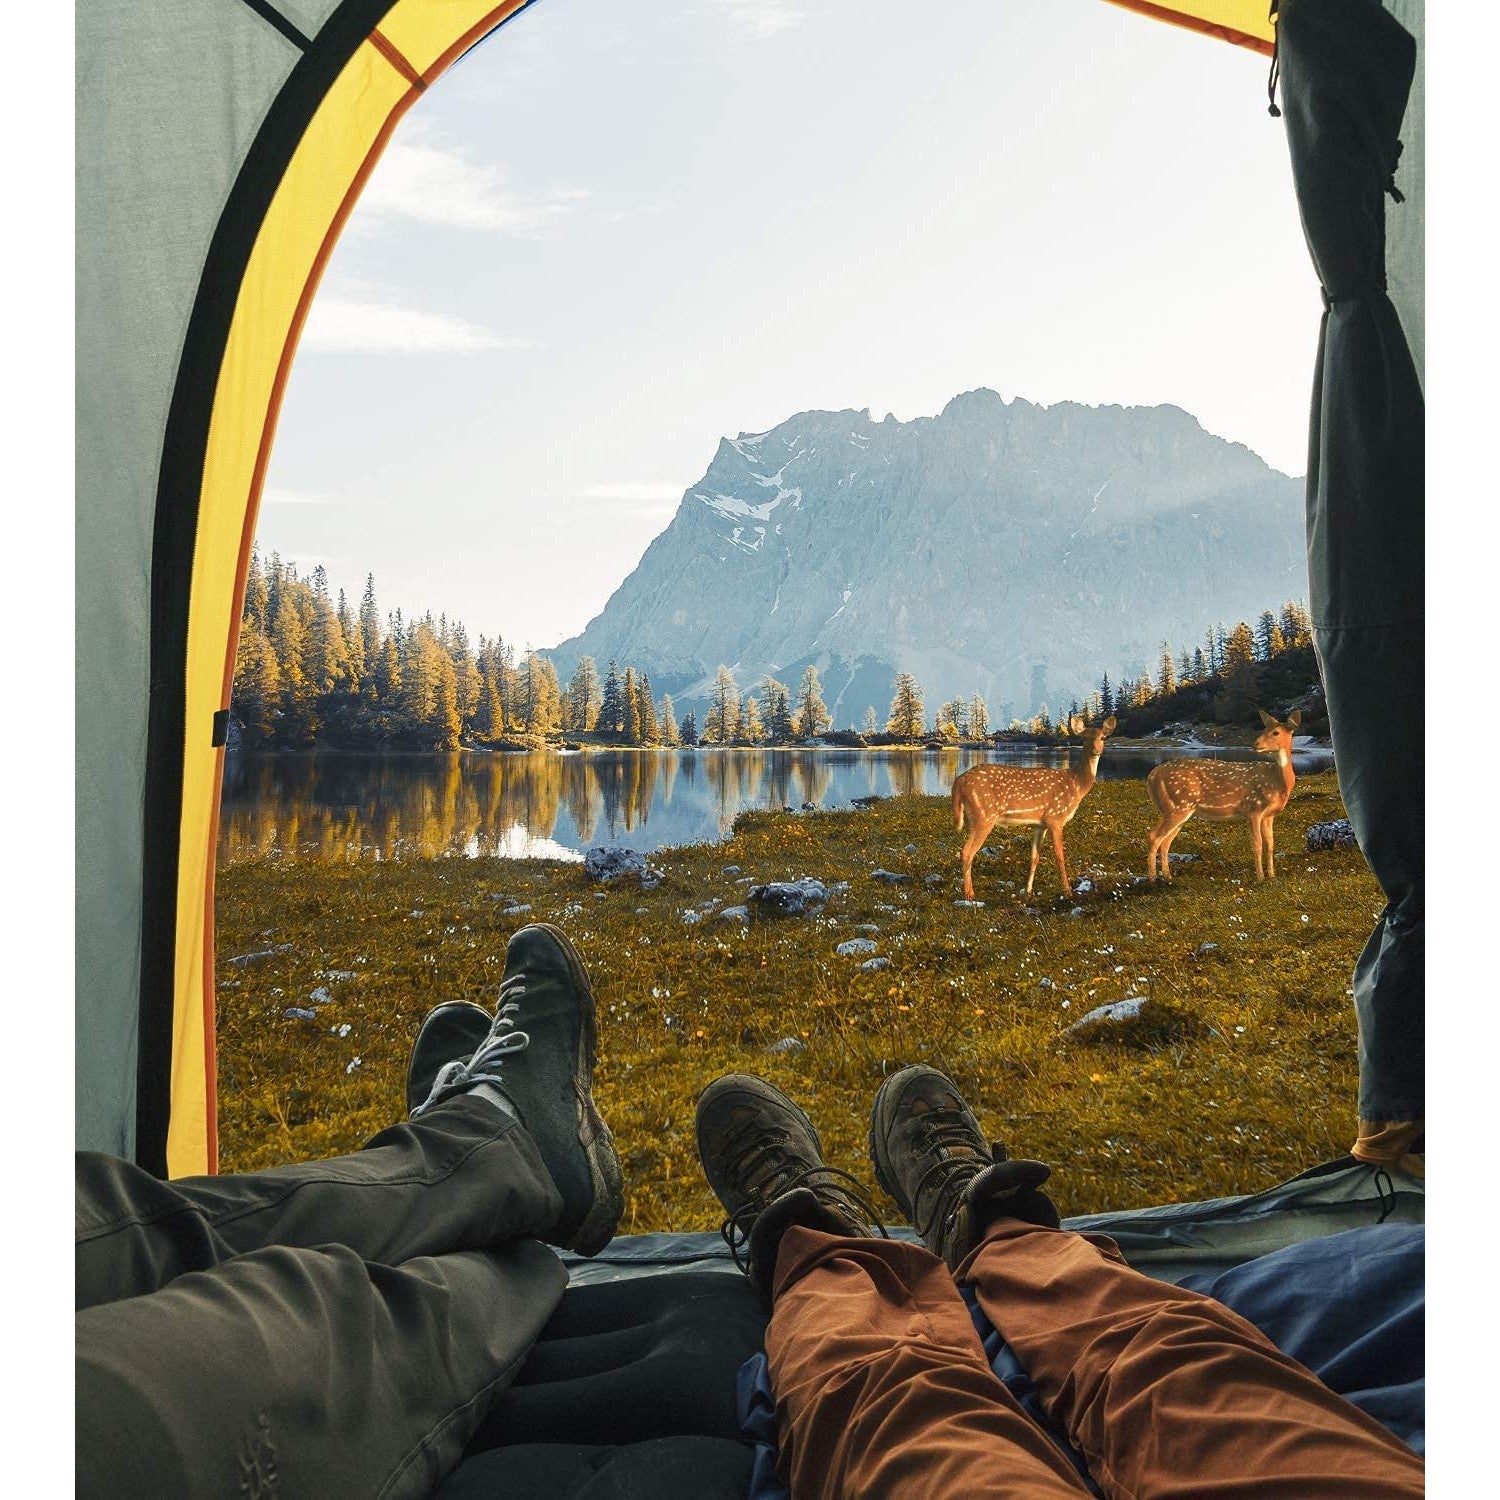 Two people are inside a tent and are watching deers in the wilderness.